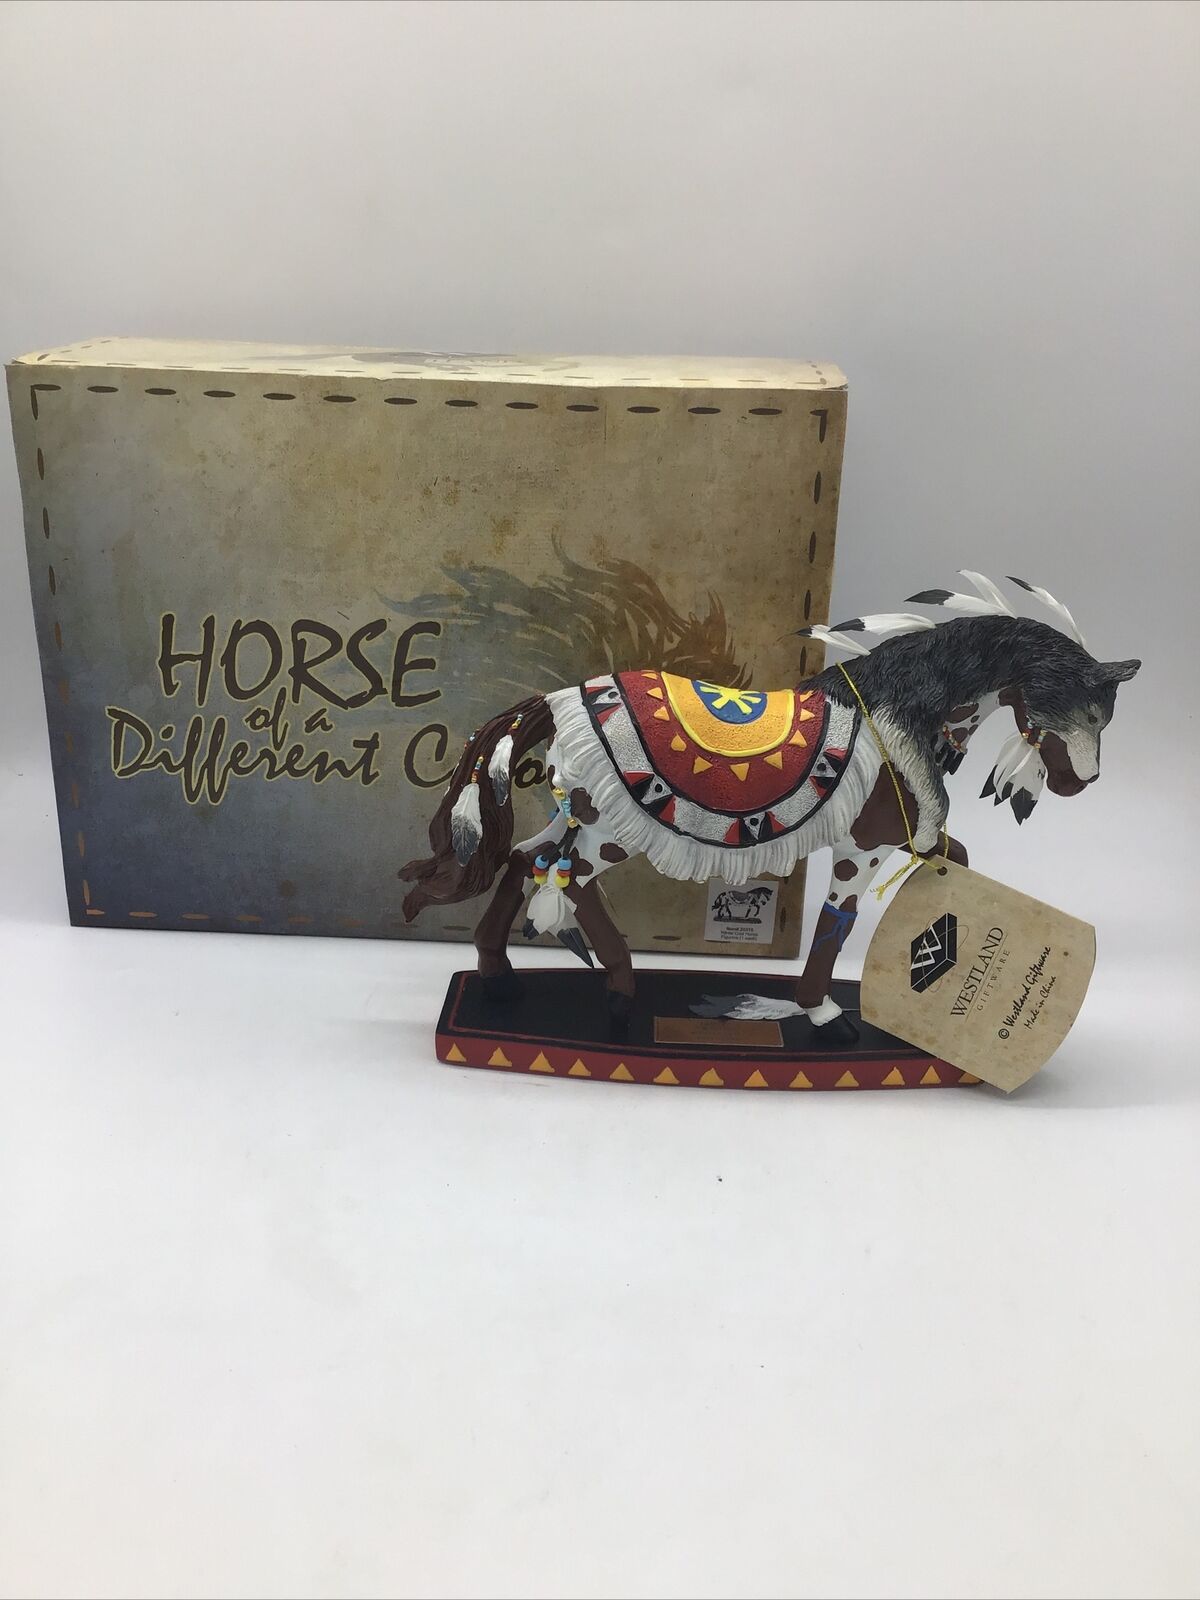 Westland Giftware Horse Of A Different Color “Winter Coat” 4133/10,000